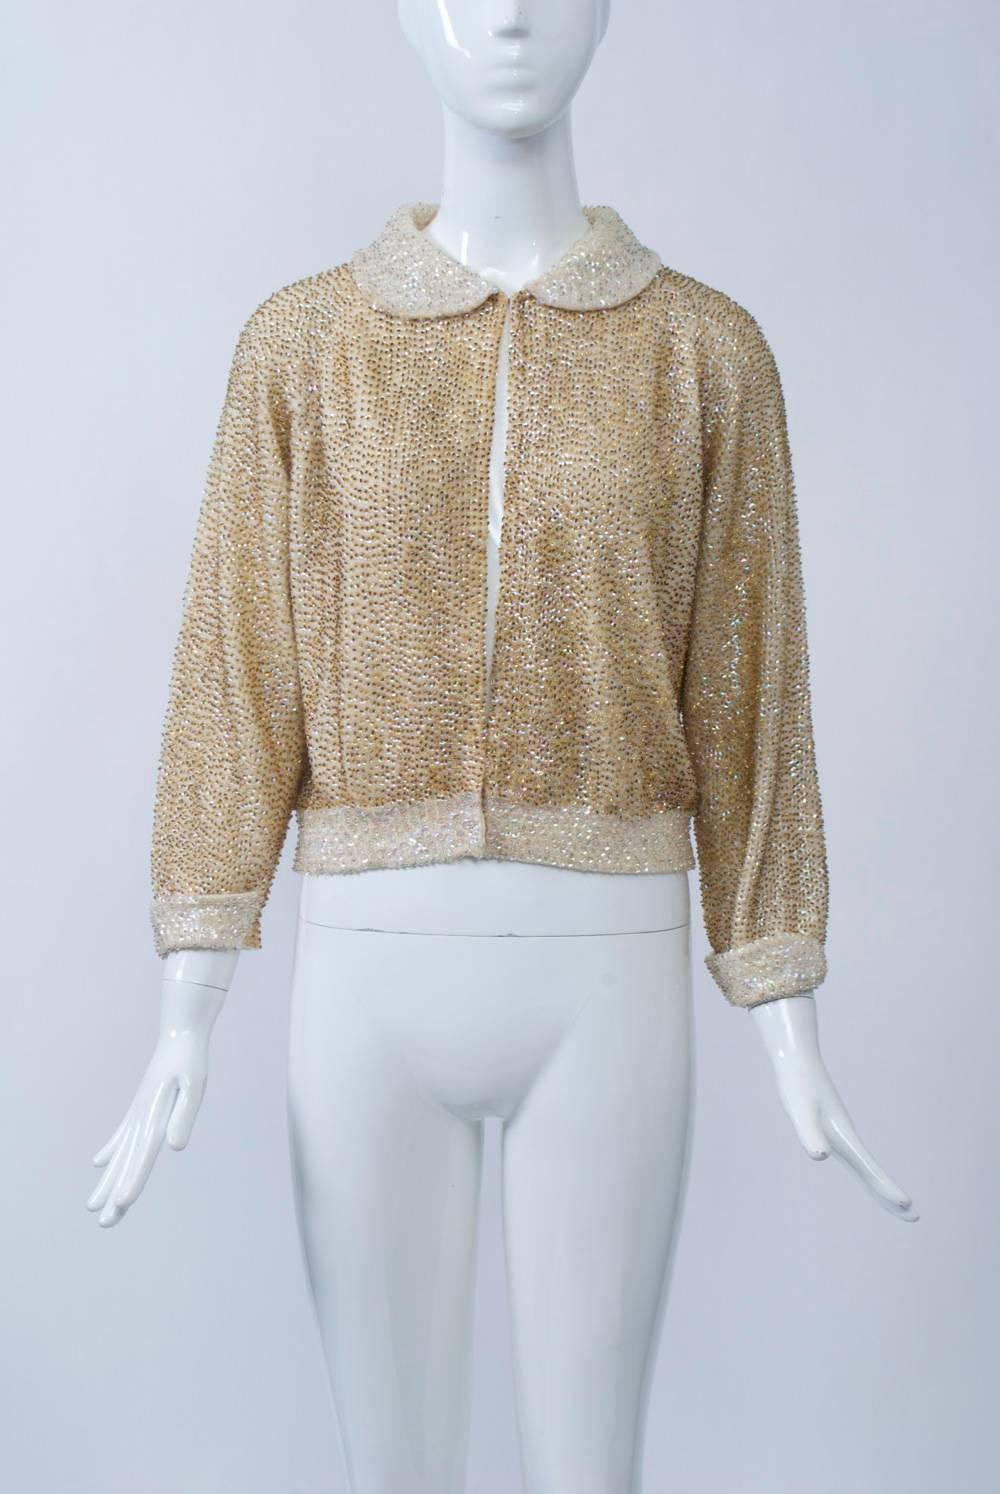 Allover sequined and beaded cardigan on an off-white knitted ground, the body with iridescent sequins and small gold beads, the collar, hem and wrists with iridescent sequins and clear beads. Peter pan collar and turned-back cuffs. Hook-and-eye